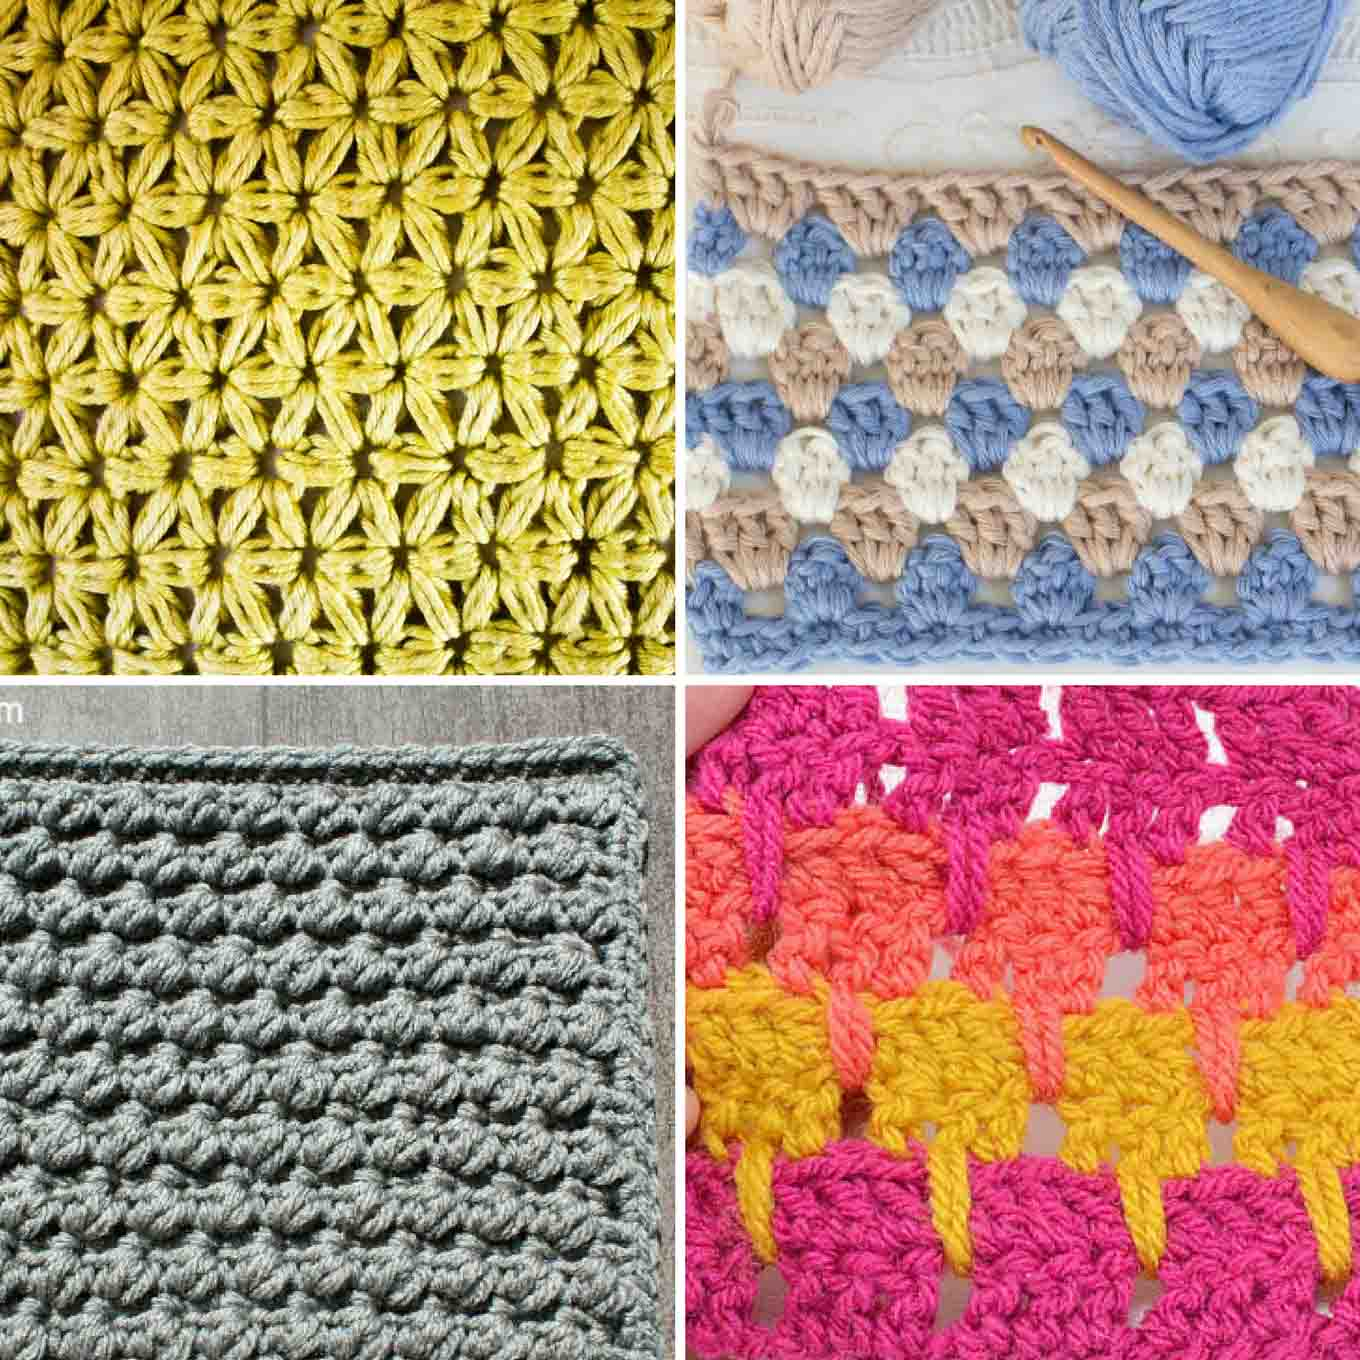 Crochet Stitches Patterns Simple Tips To Master Crochet Stitches Crochet And Knitting